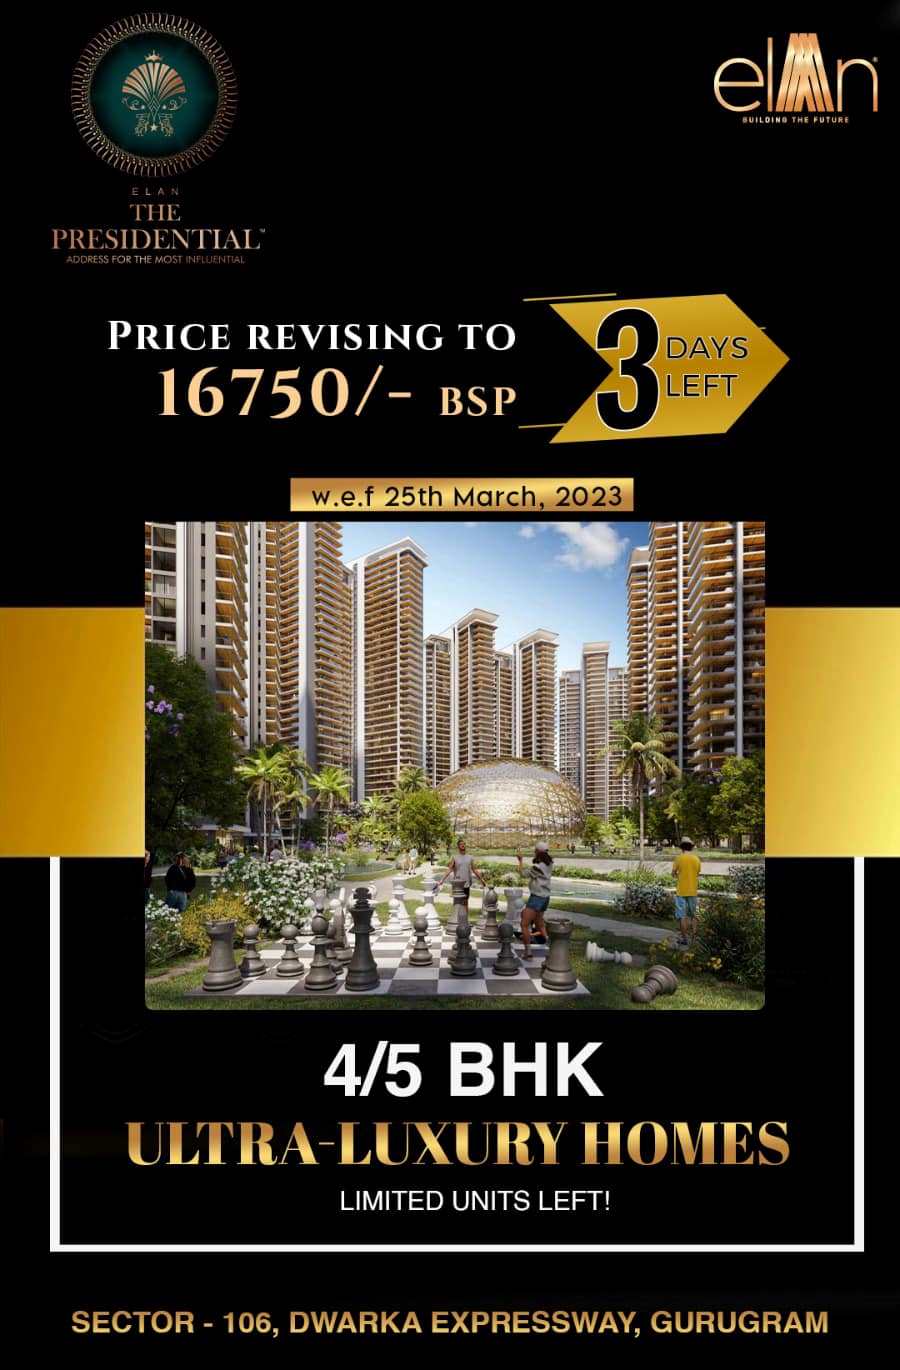 Price appreciating in 3 days to Rs 16750 BSP at Elan The Presidential in Dwarka Expressway, Gurgaon Update